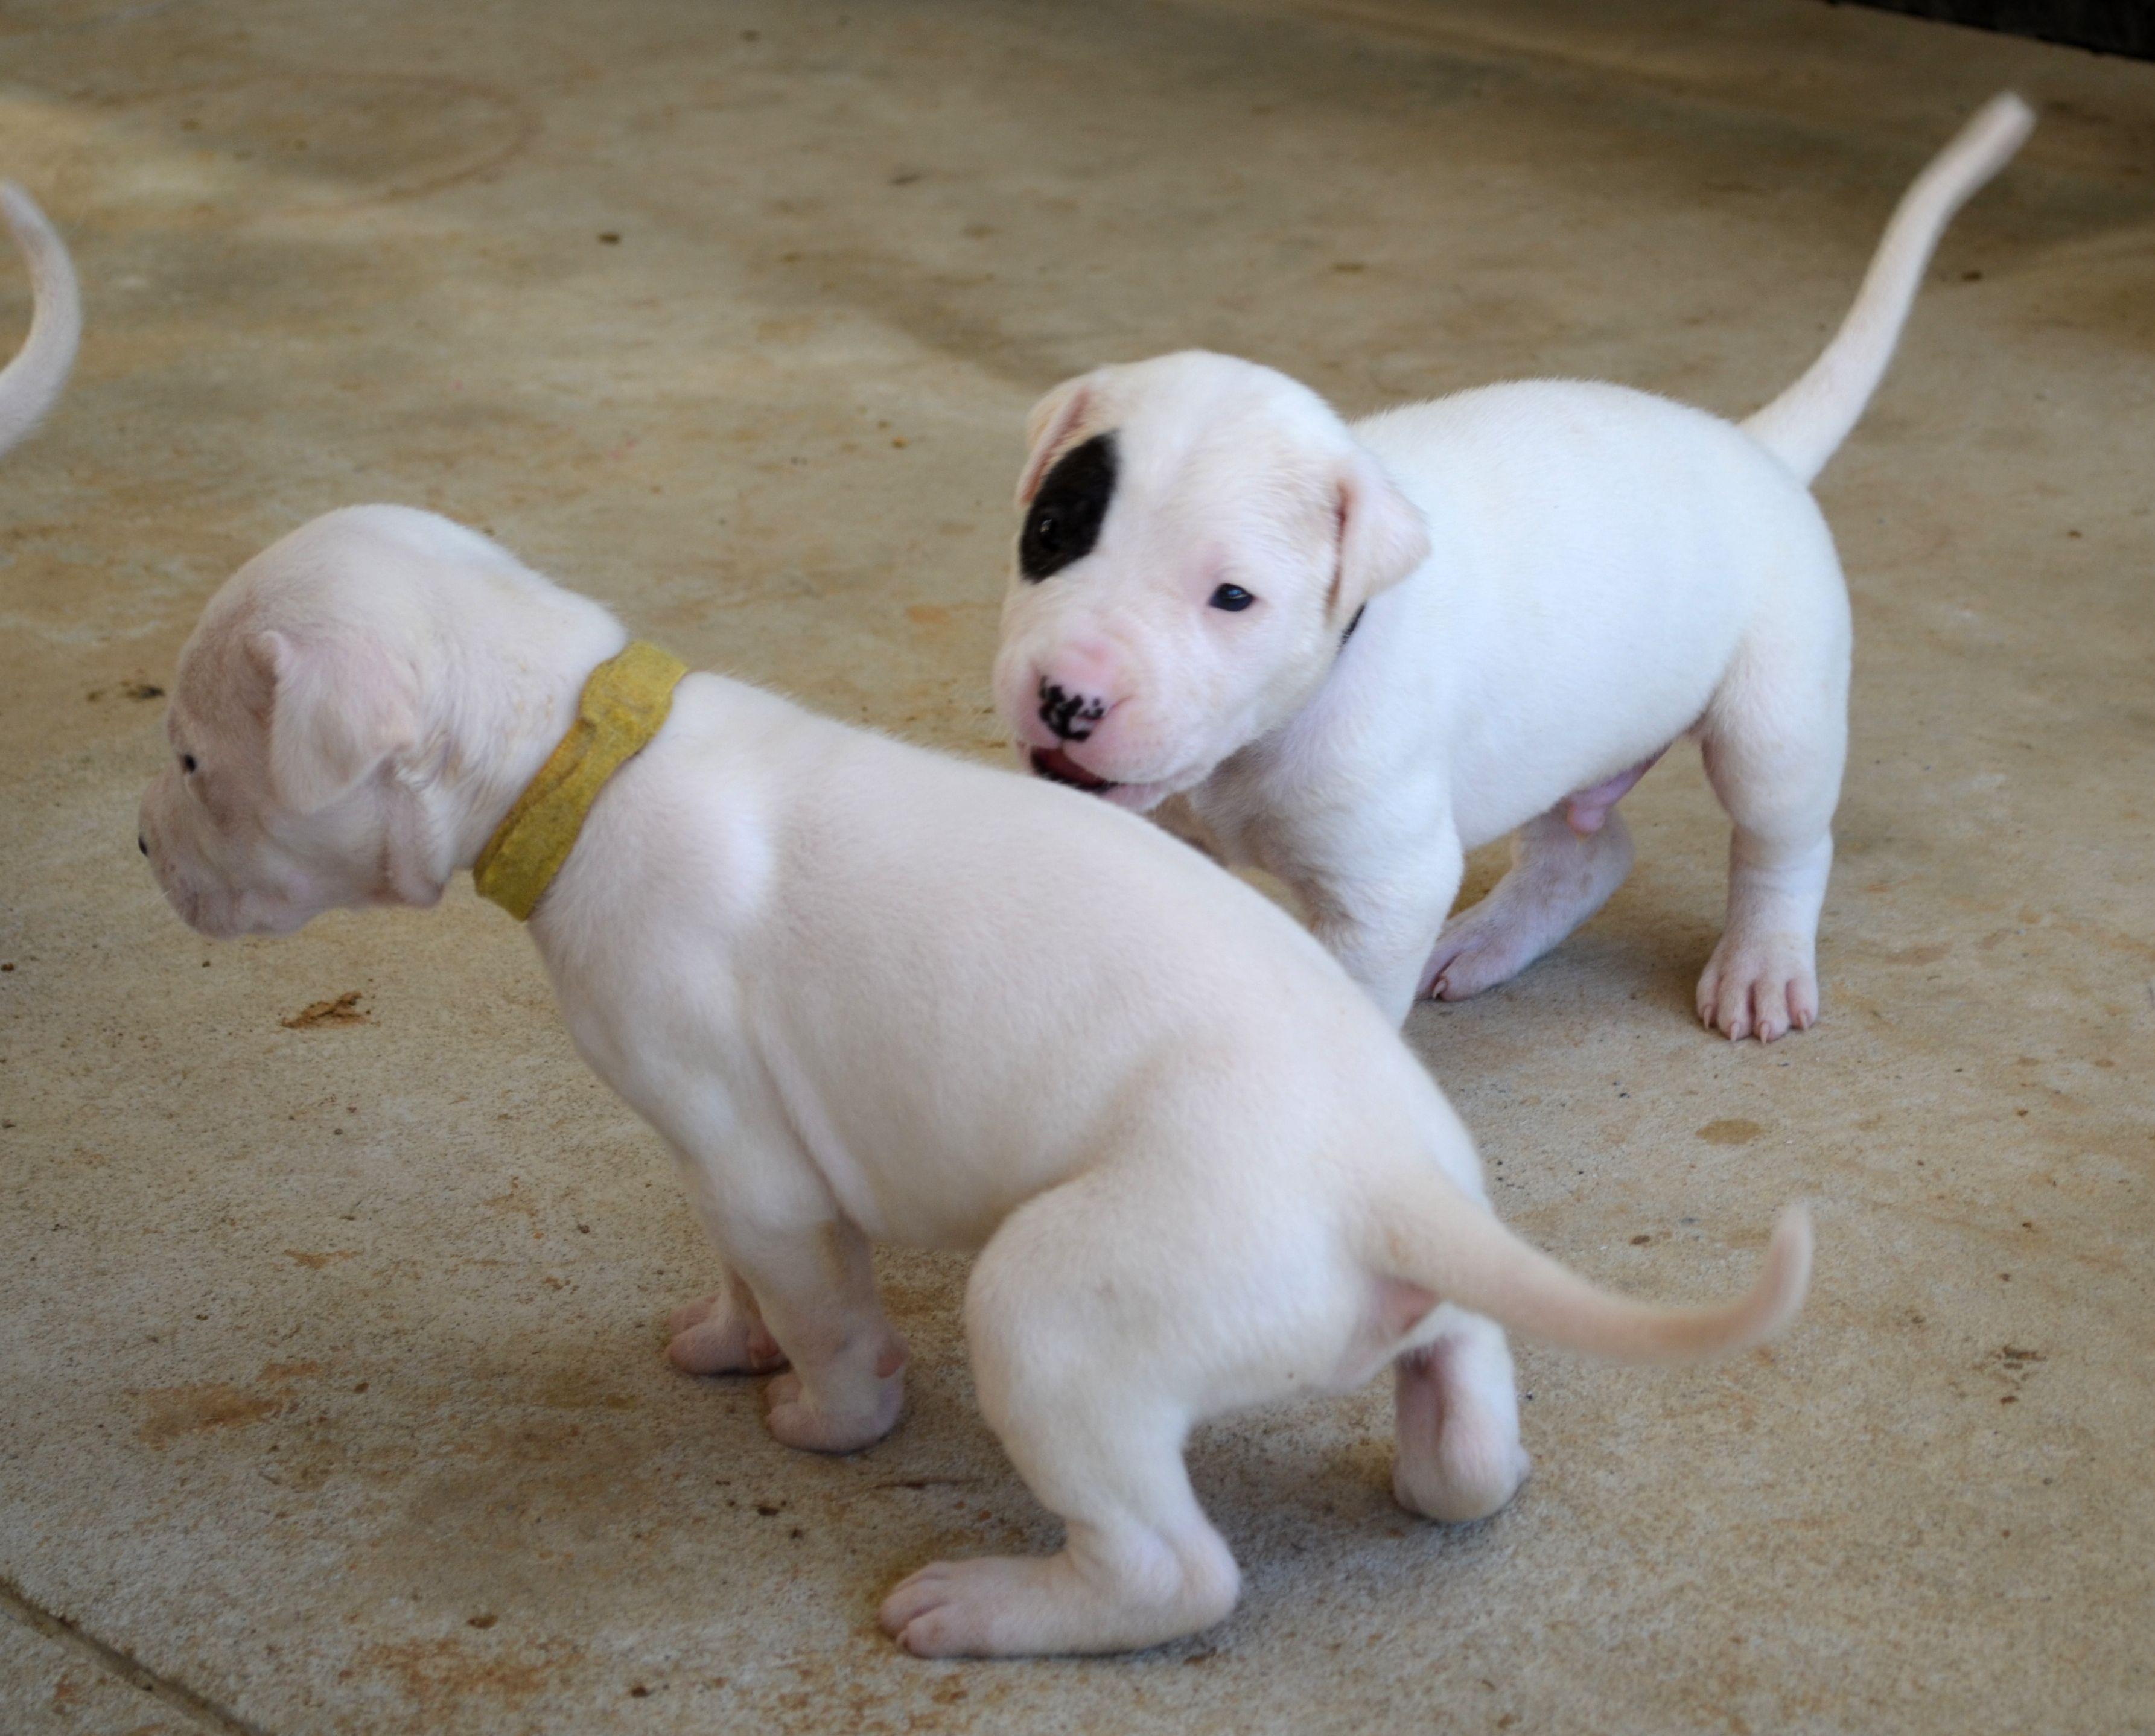 Playful puppies Dogo Argentino wallpaper and image